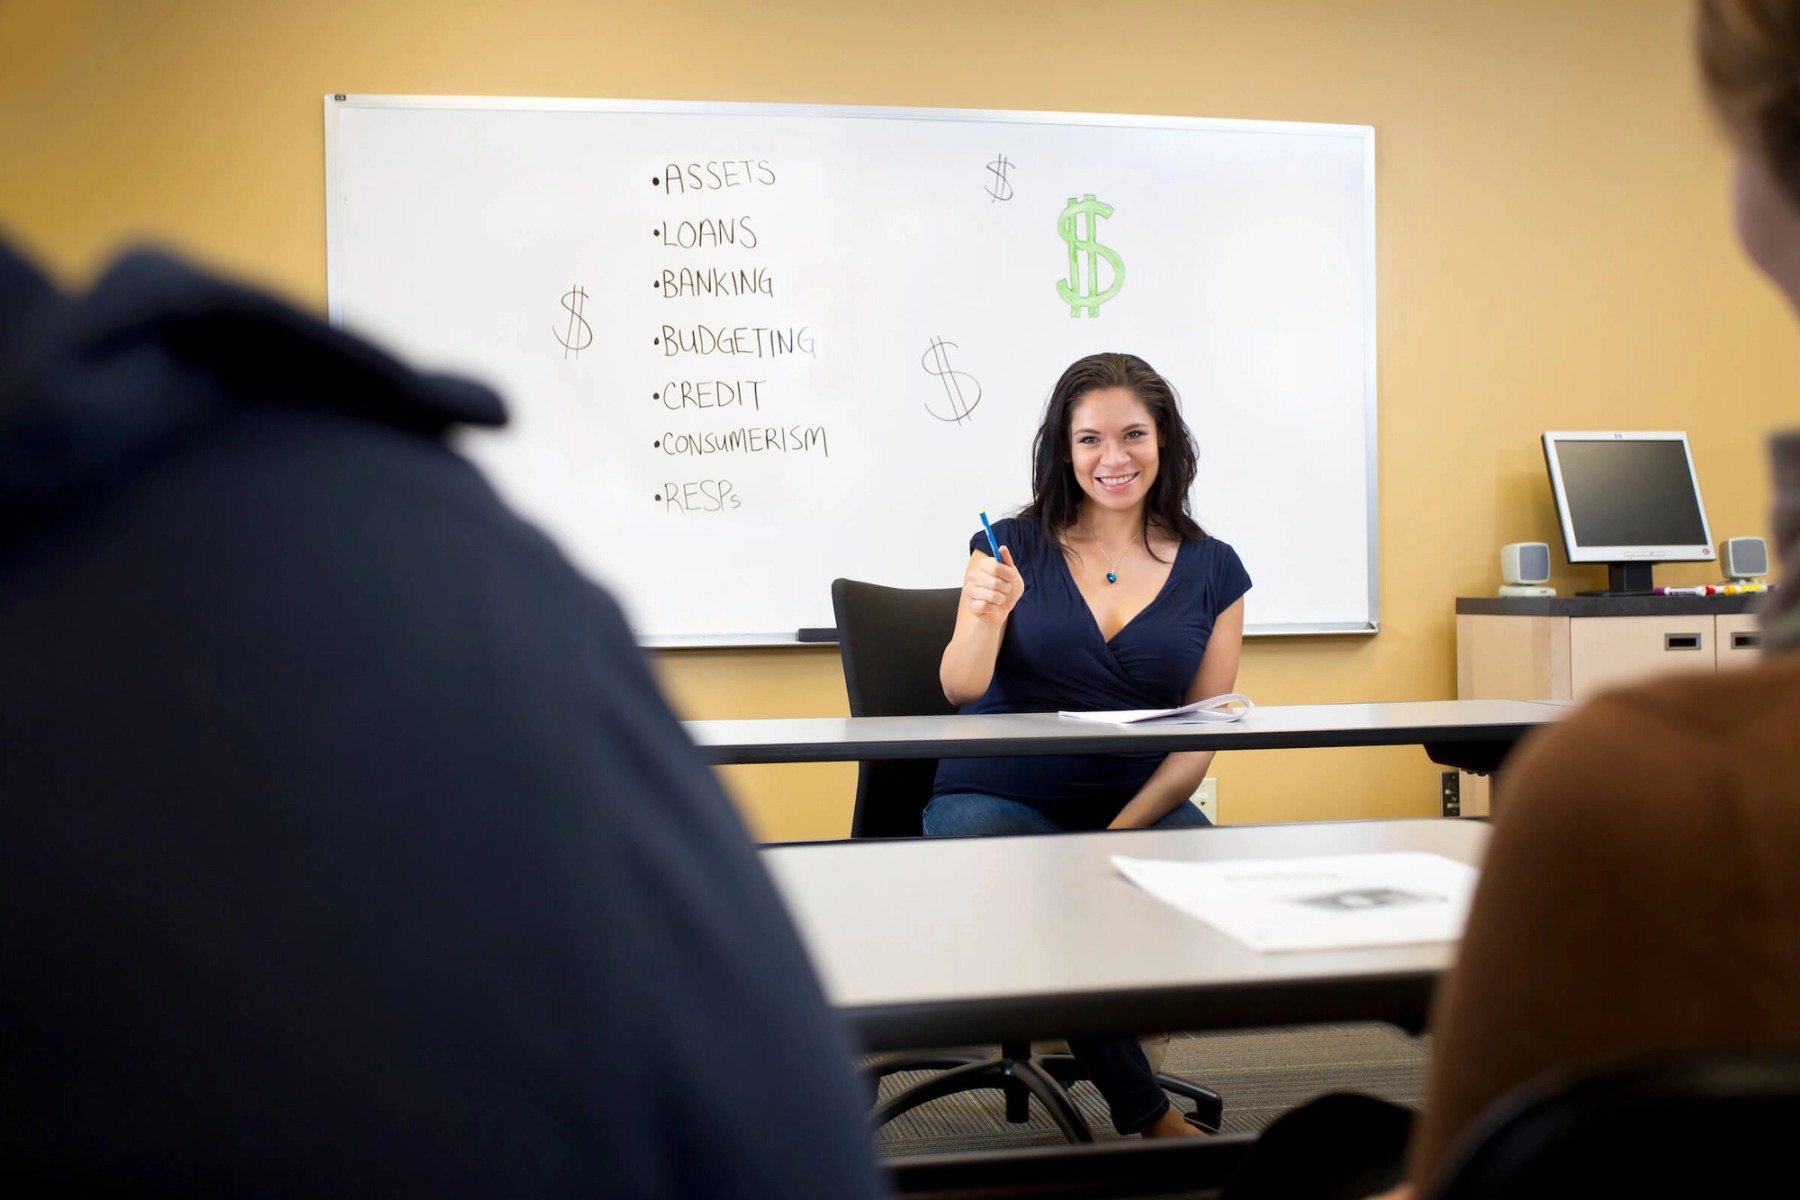 A woman addresses questions in front of a whiteboard reading 'Assets, Loans, Banking, Budgeting, Credit, Consumerism, RESPs'.